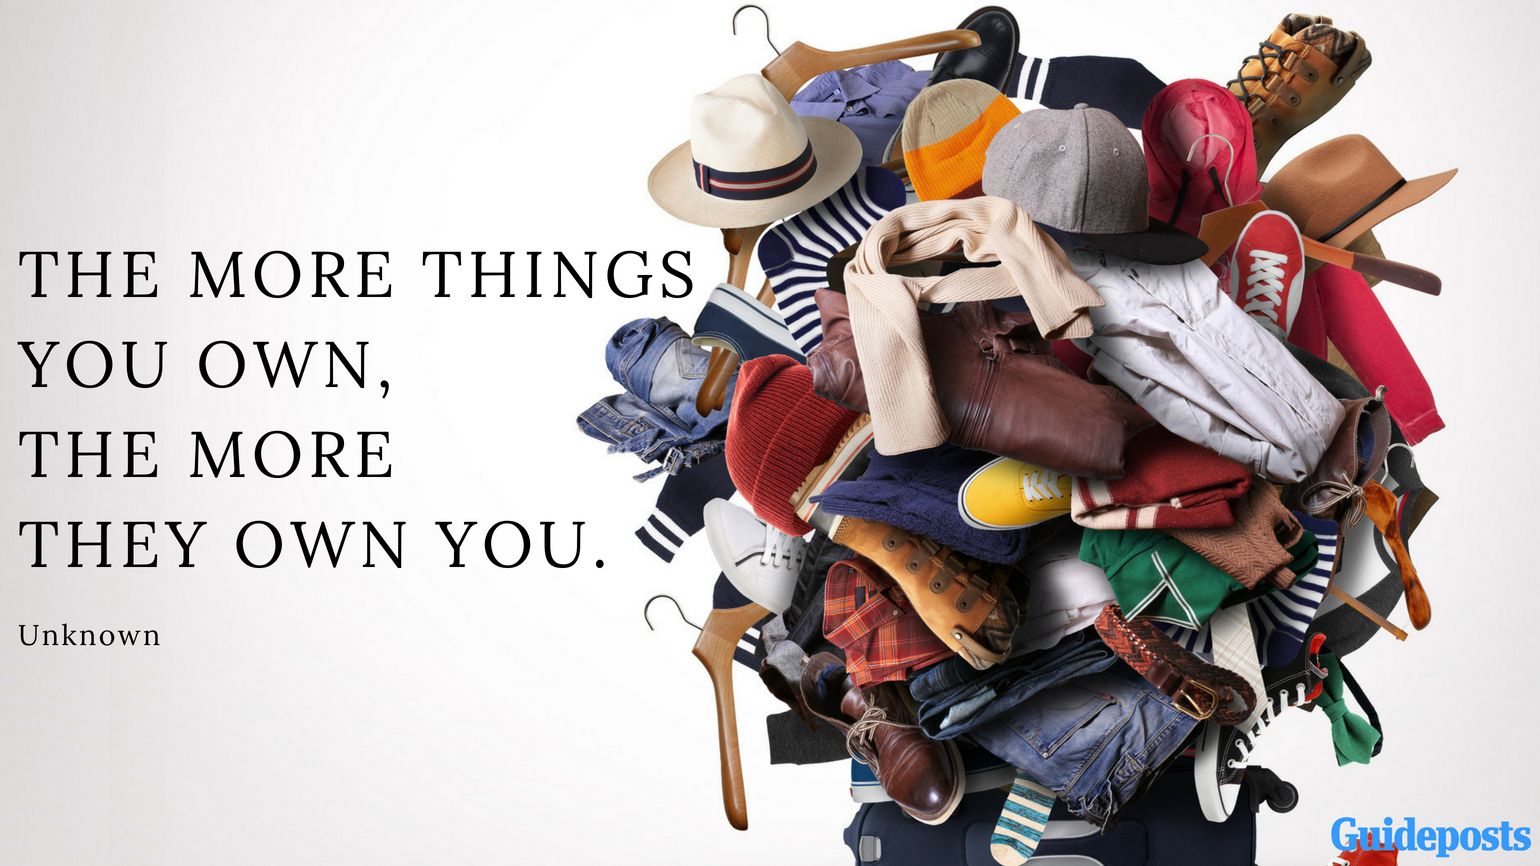 Motivational Quotes for Decluttering: The more things you own, the more they own you. - Unknown better living, life advice